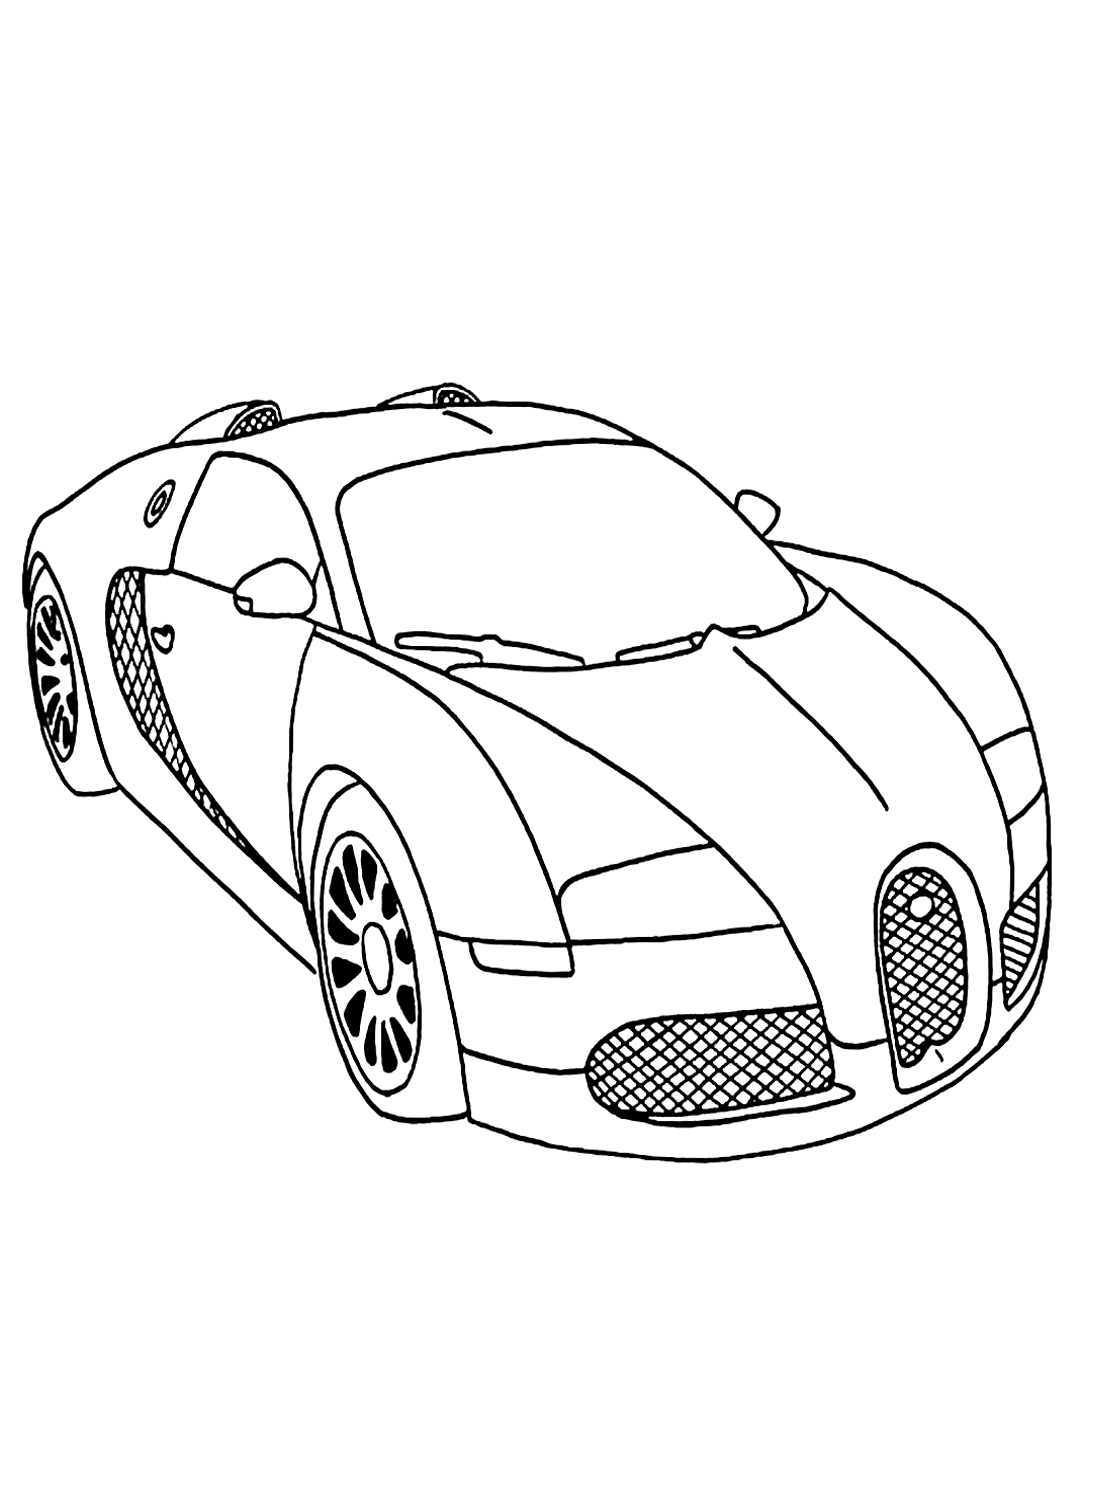 46 Free Printable Racing Car Coloring Pages